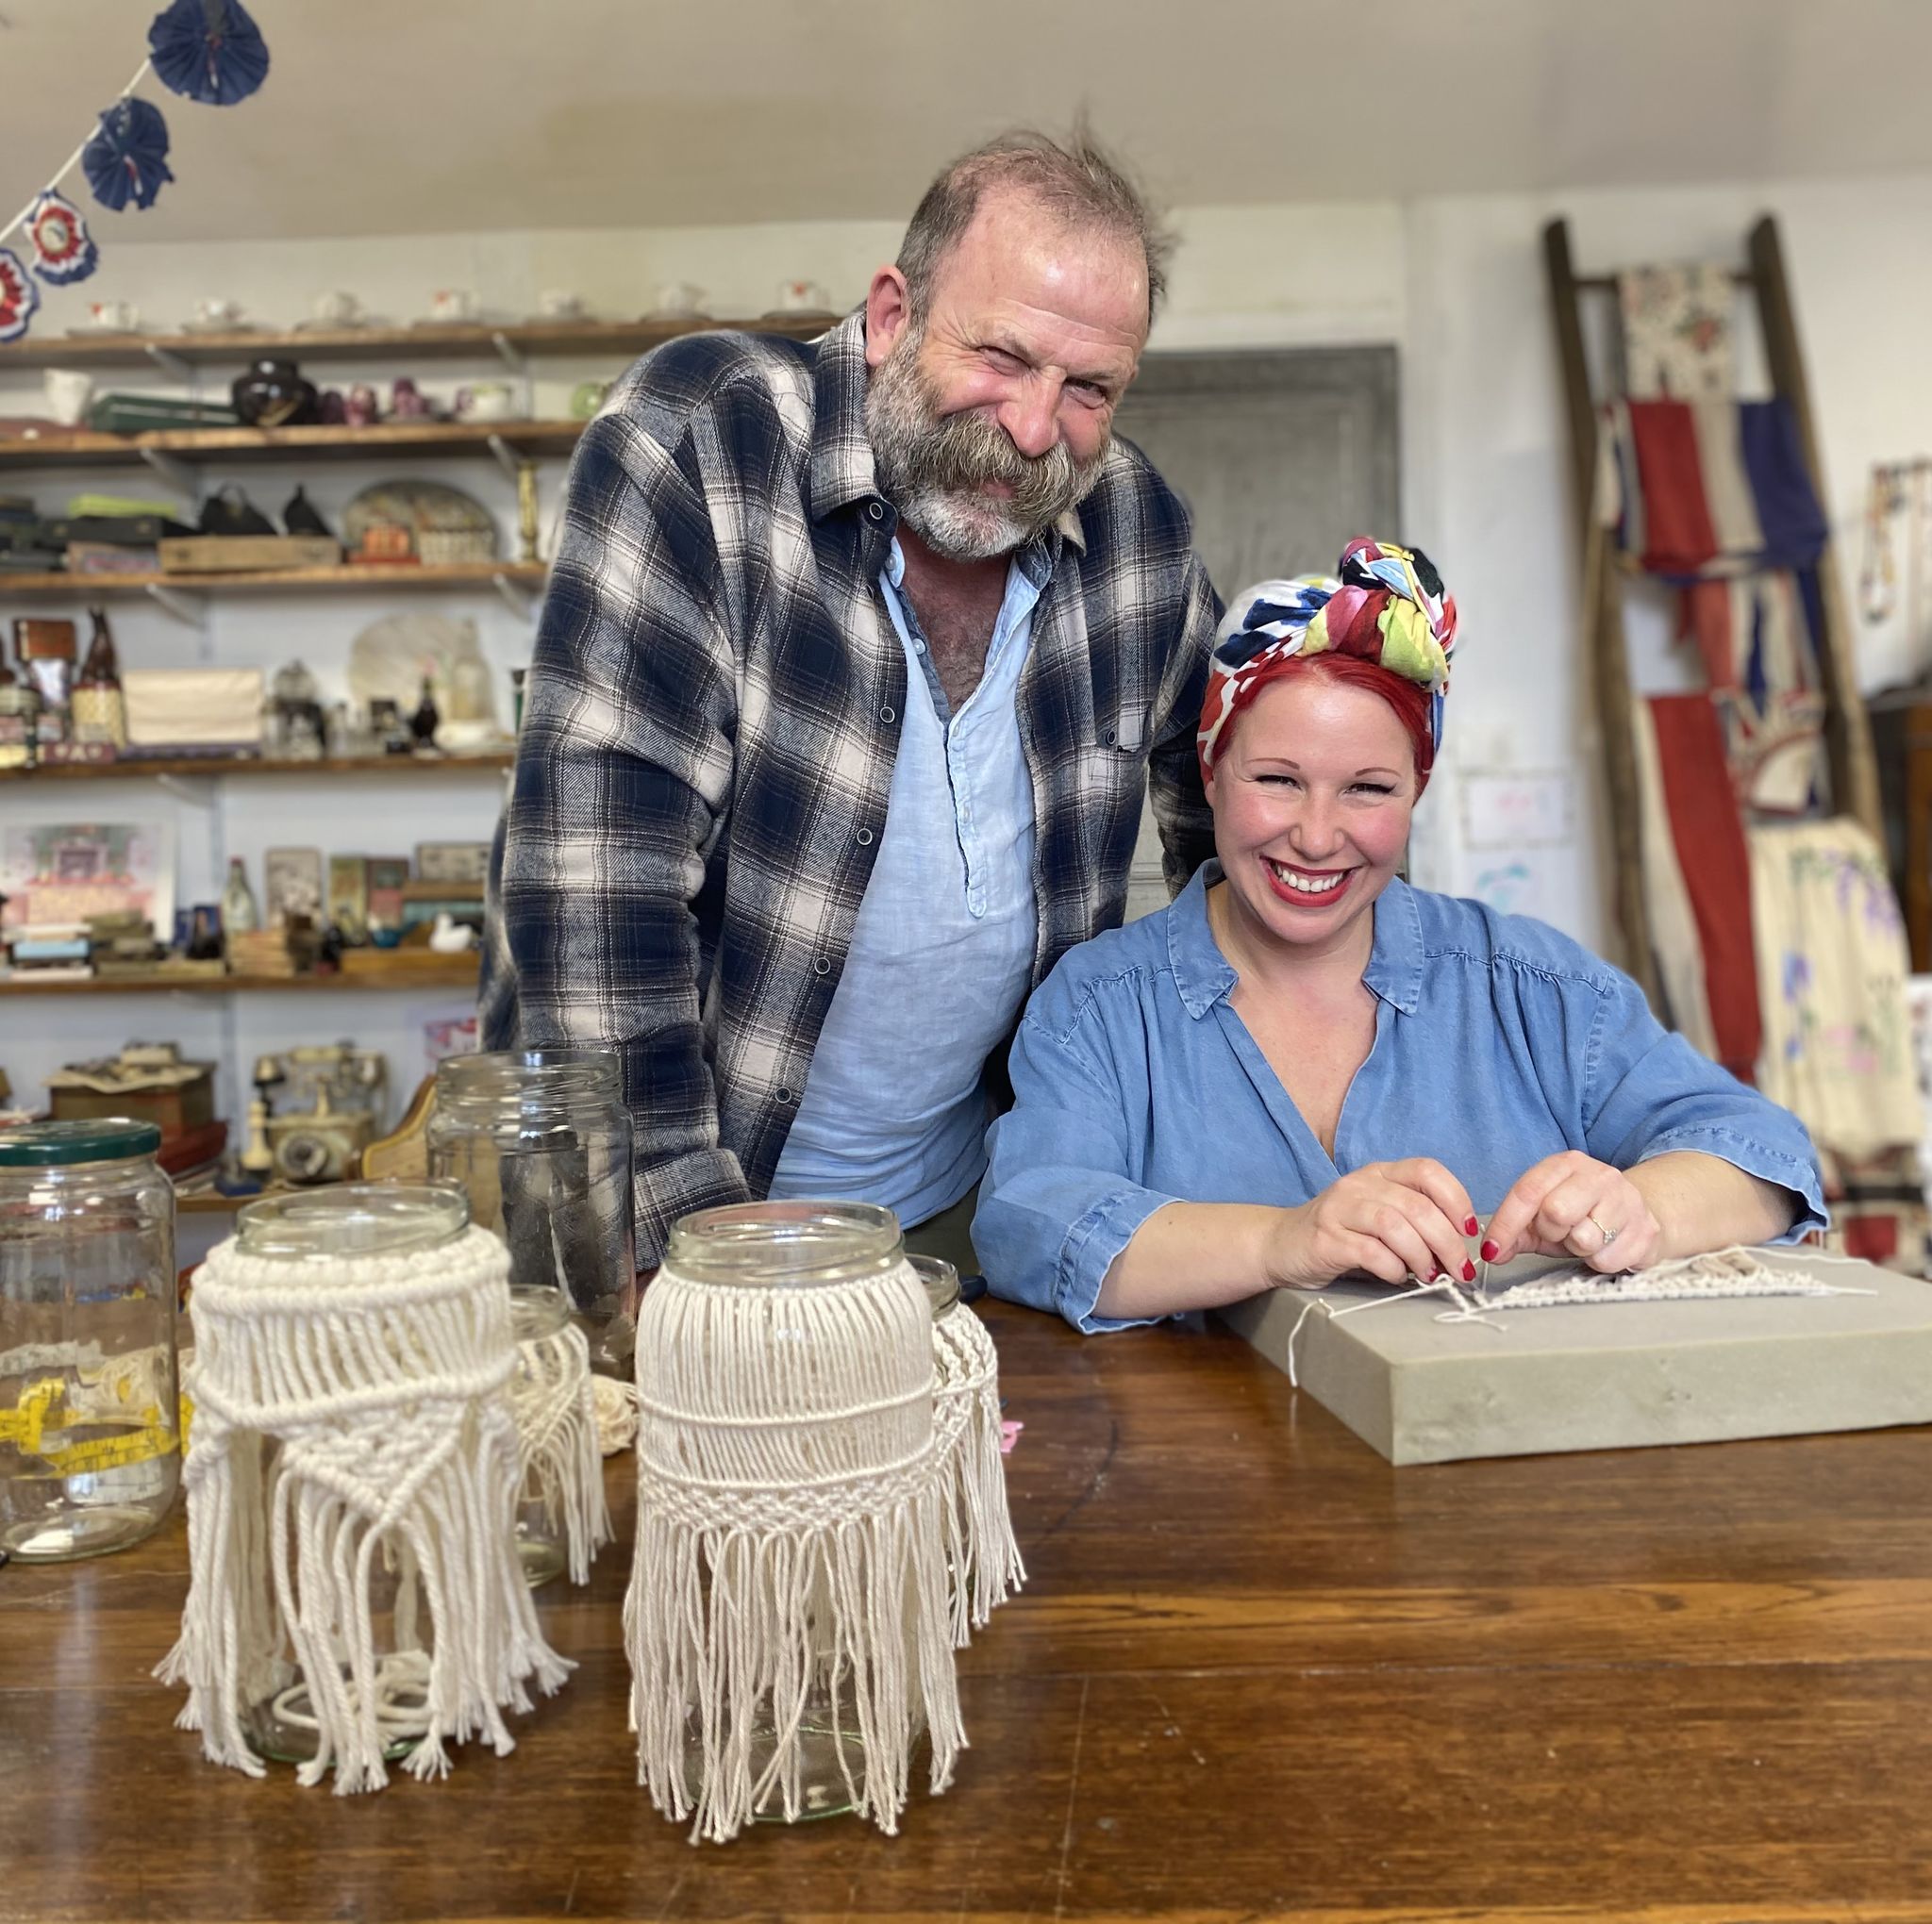 dick and angel strawbridge reveal new series of make do and mend